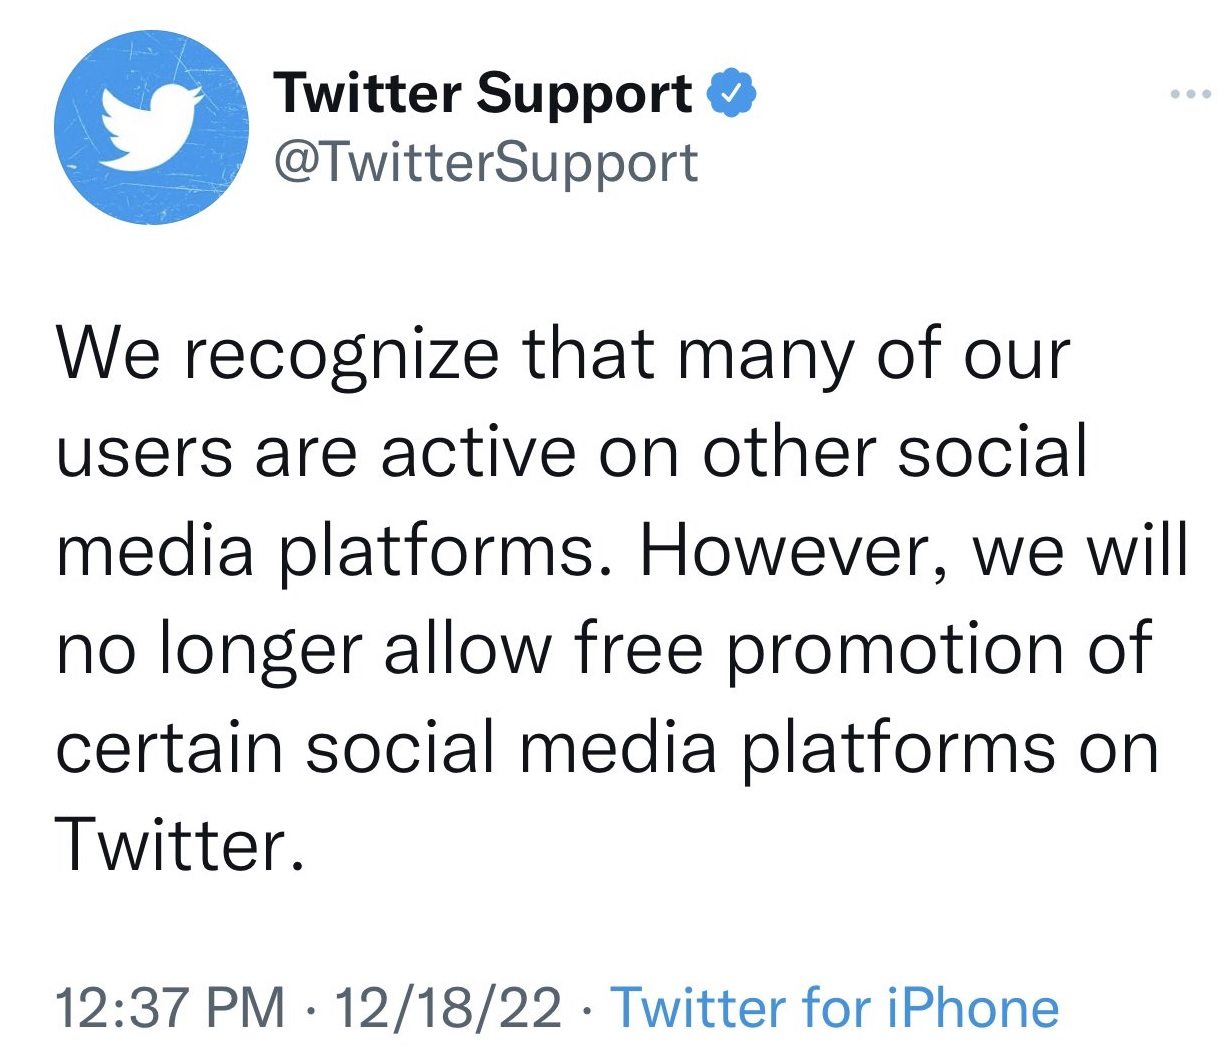 @TwitterSupport: We recognize that many of our users are active on other social media platforms. However, we will no longer allow free promotion of certain social media platforms on Twitter.